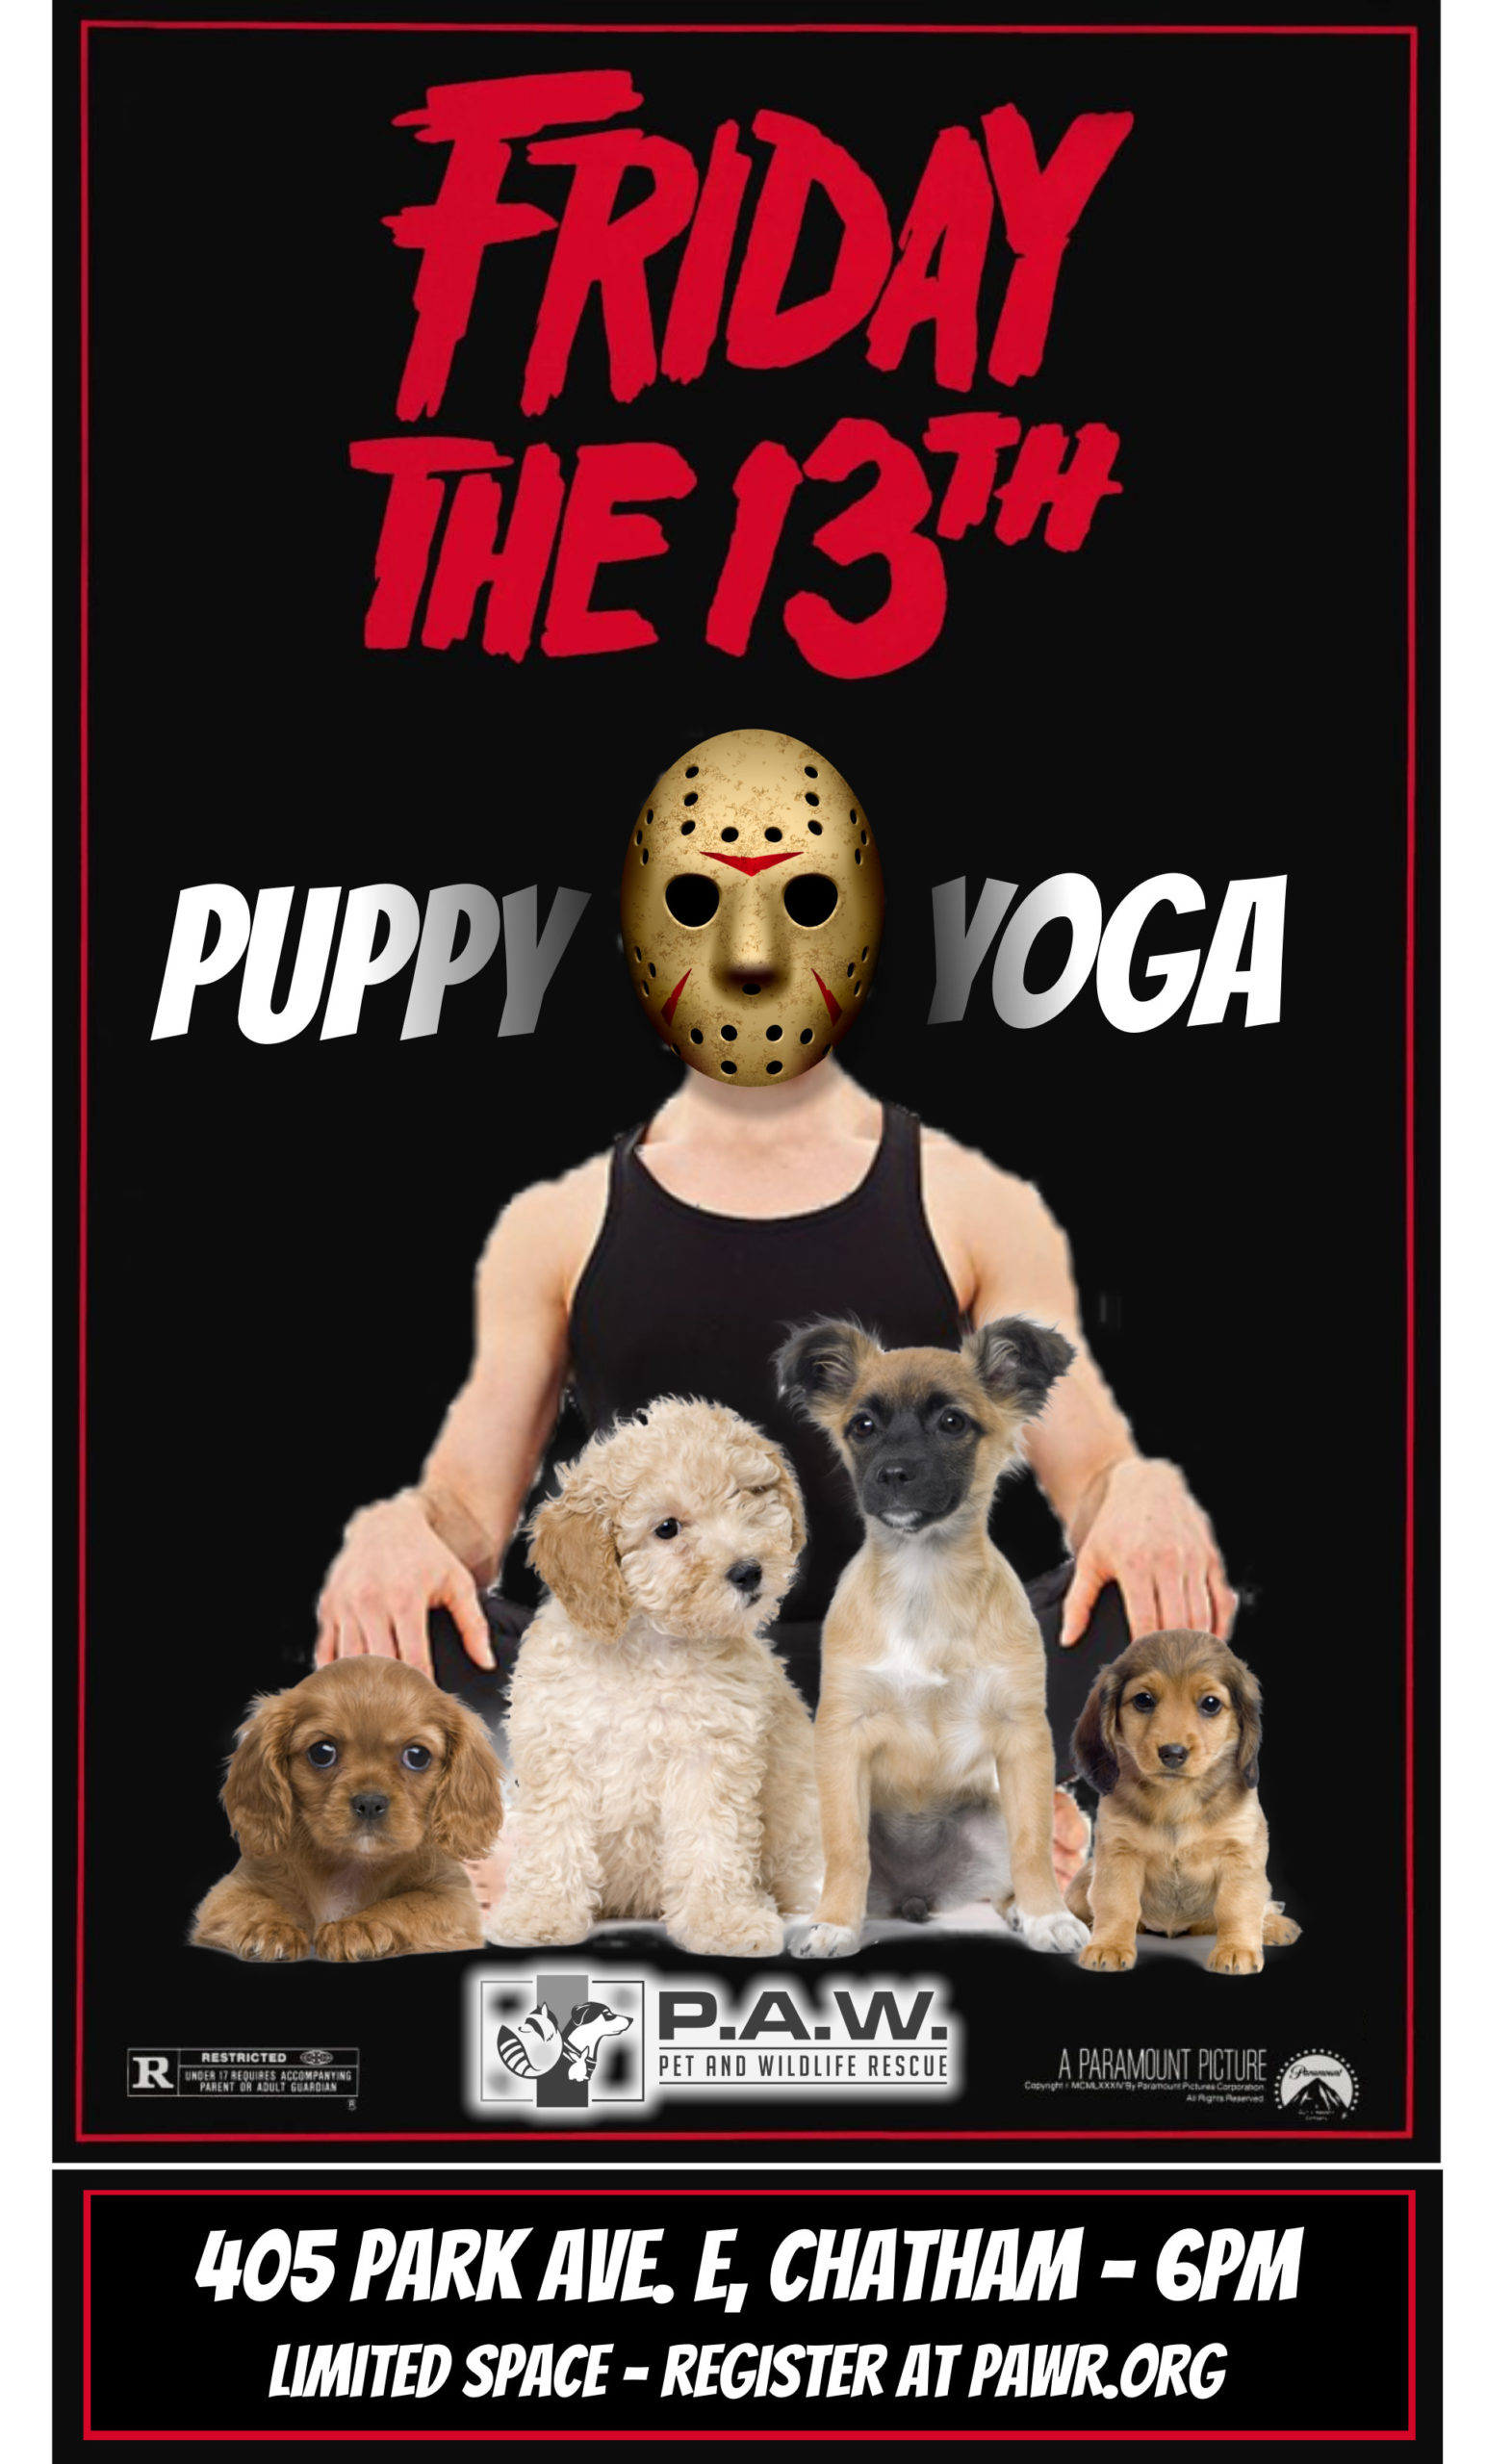 Puppy Yoga on Friday the 13th